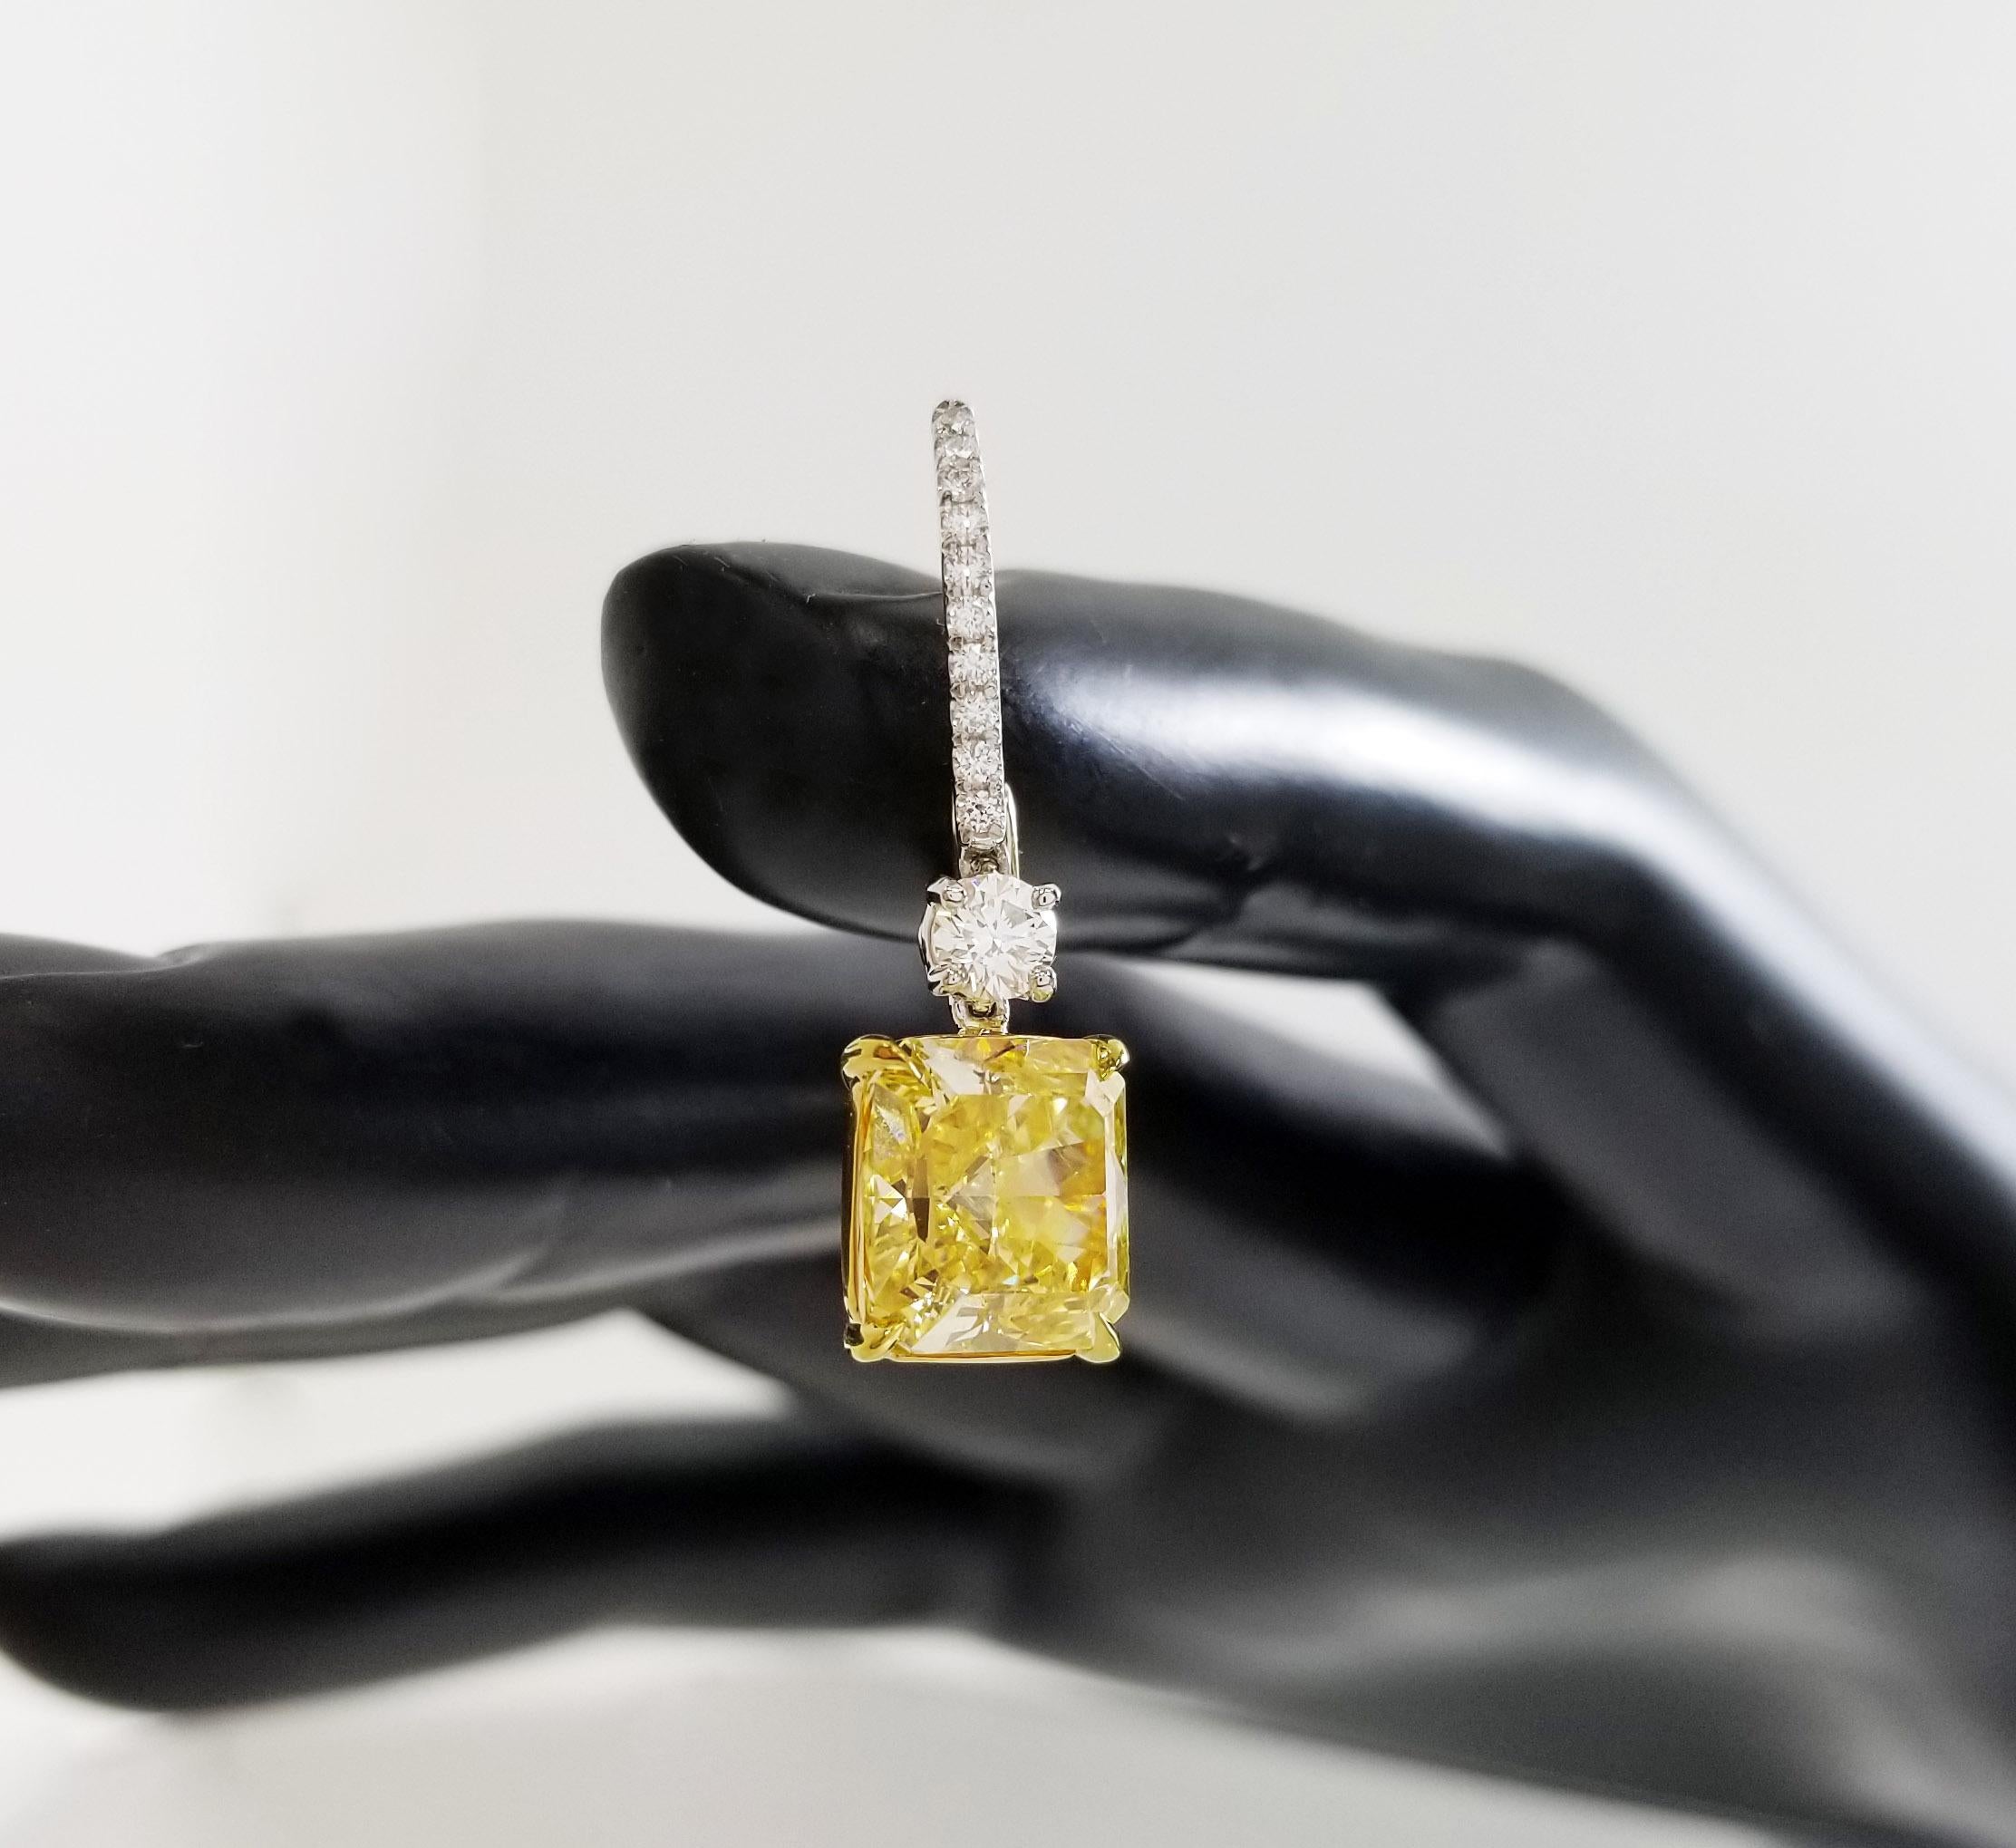 An exquisite pair of intense yellow diamond earrings – each radiant cut diamond is 3.25 and 3.27 carats, respectively. The natural, GIA-certified fancy-color diamonds are both of VVS1 clarity – set on 18k yellow gold and platinum. The hoop of the